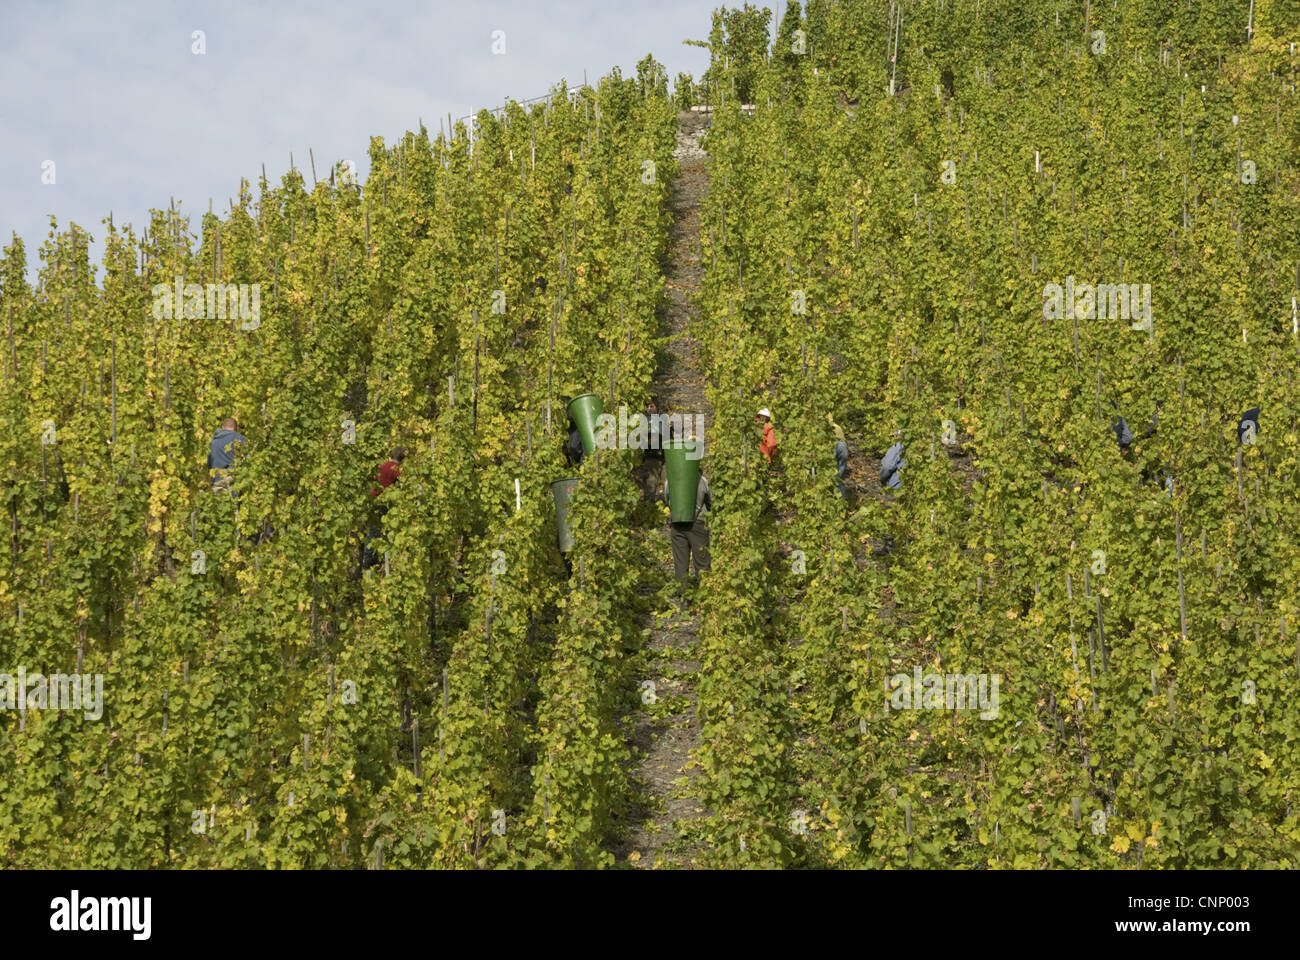 View of vineyard on wine estate, rows of grape vines being harvested by workers, Bernkastel, Rhineland-Palatinate, Germany Stock Photo